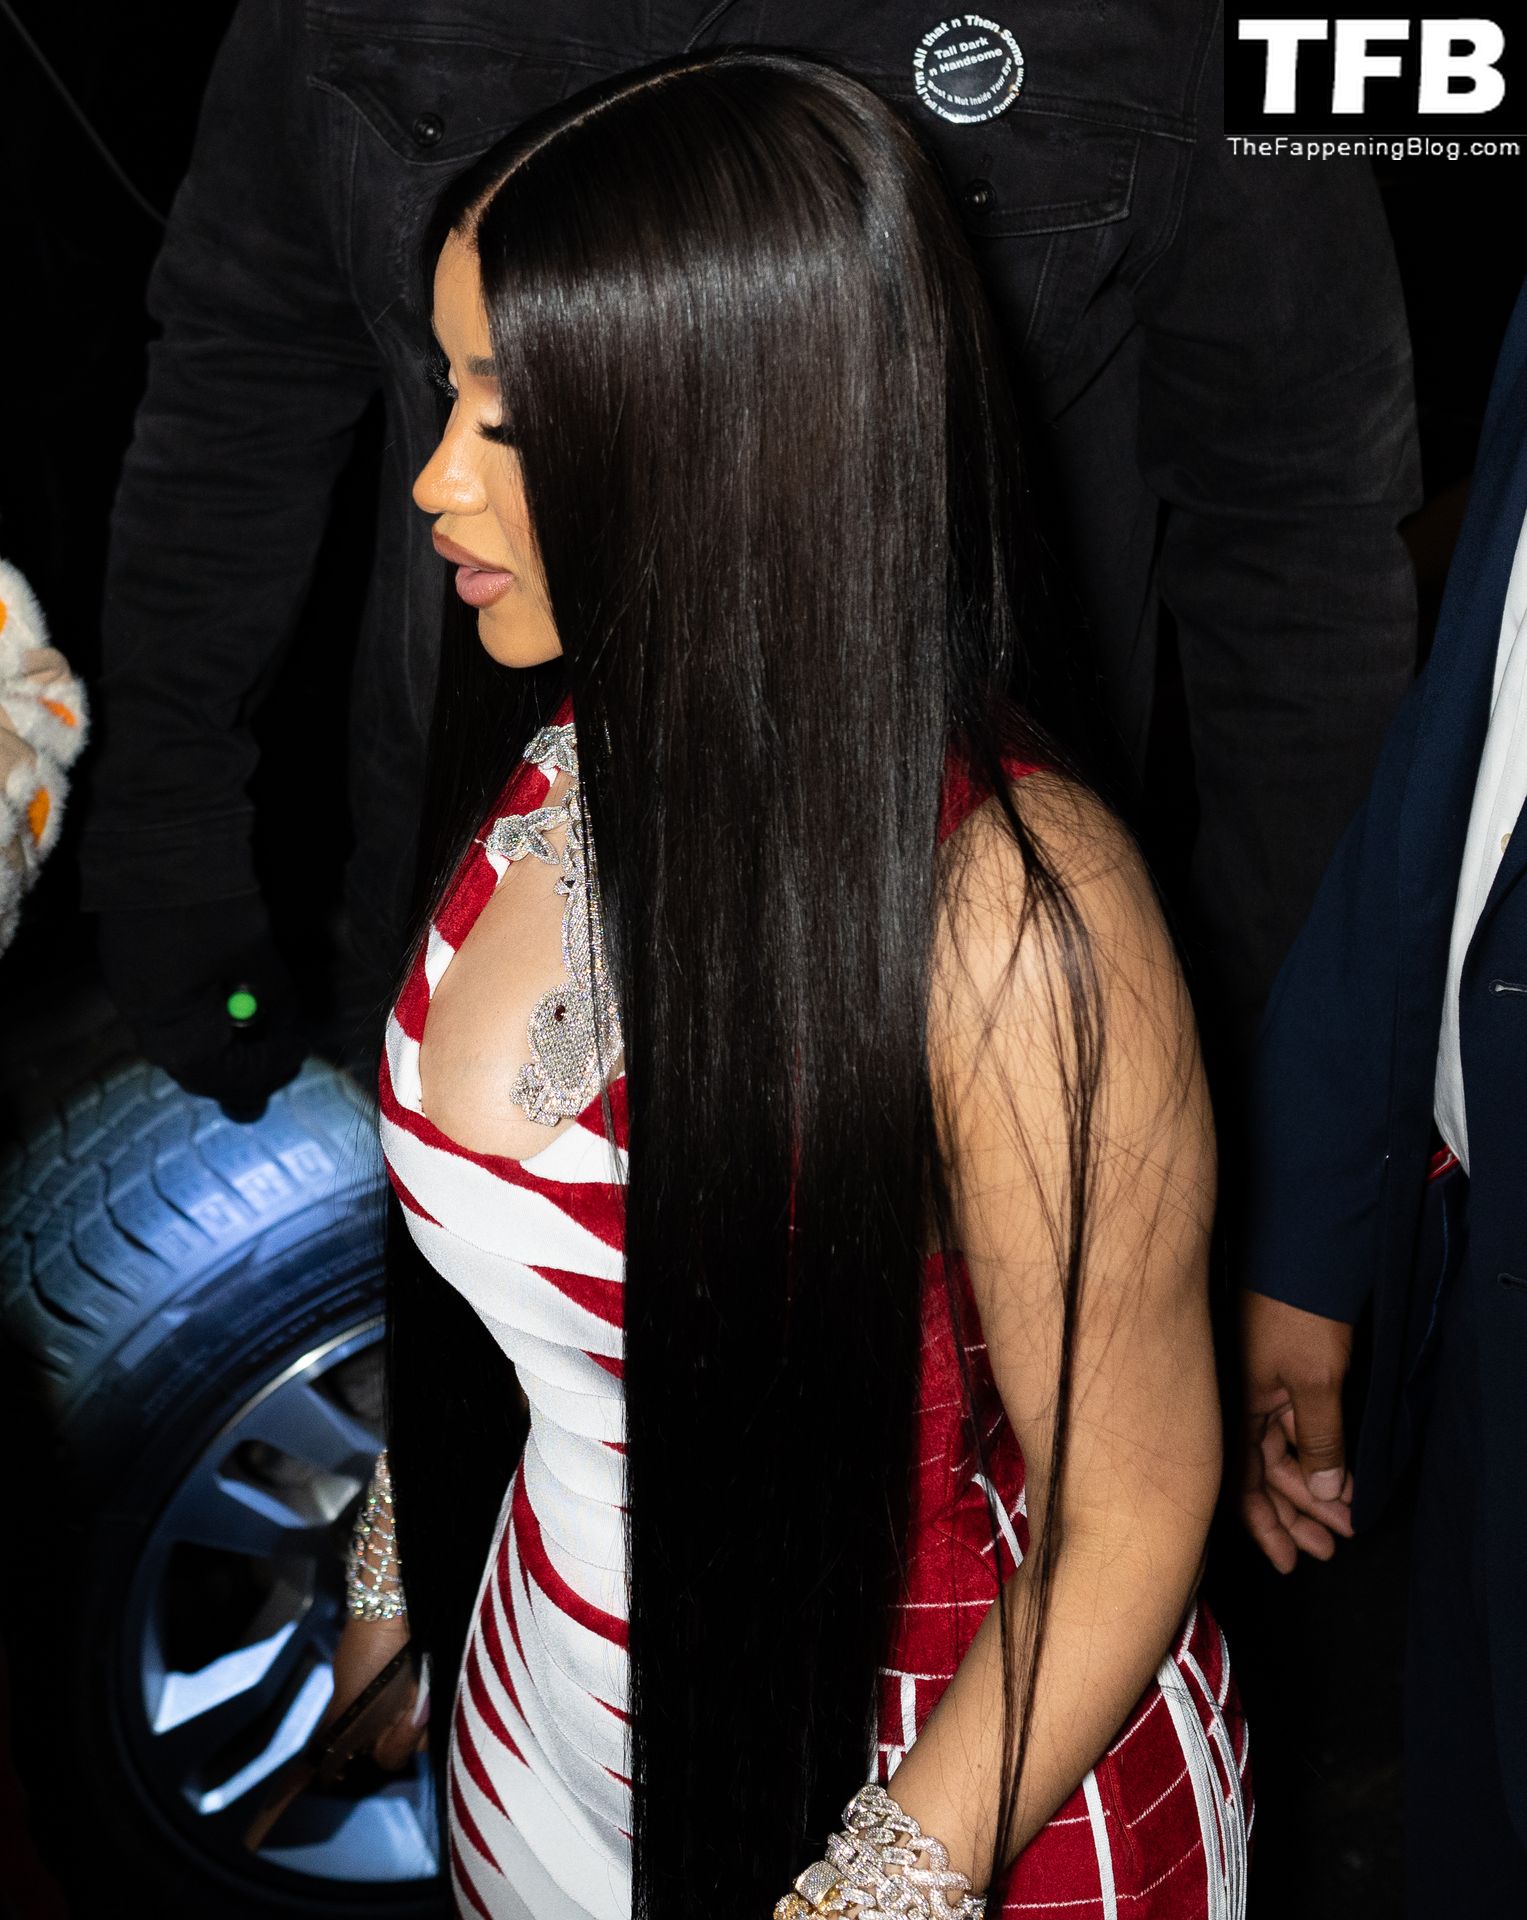 Cardi B Sexy Tits The Fappening Blog 6 - Cardi B Flaunts Her Cleavage as She Leaves a Club with Offset in NYC (8 Photos)